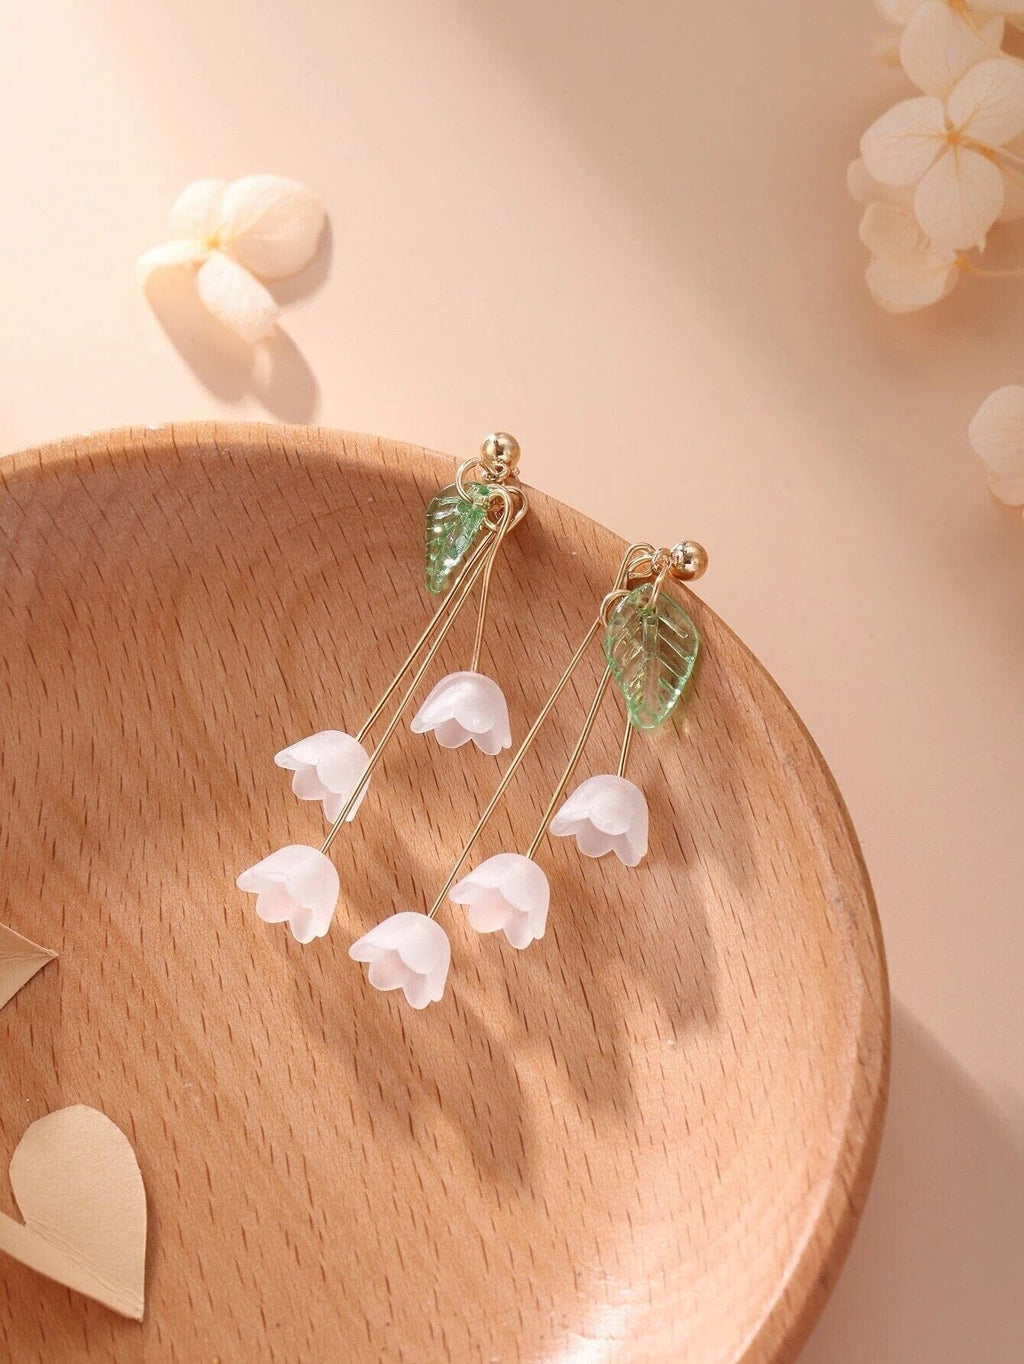 Lilly of the Valley Floral Earrings, White Flower Studs, Wedding Bridal Bridesmaid Gold Flower Tassel Studs, Romantic Style Bridal Earrings - KaleaBoutique.com